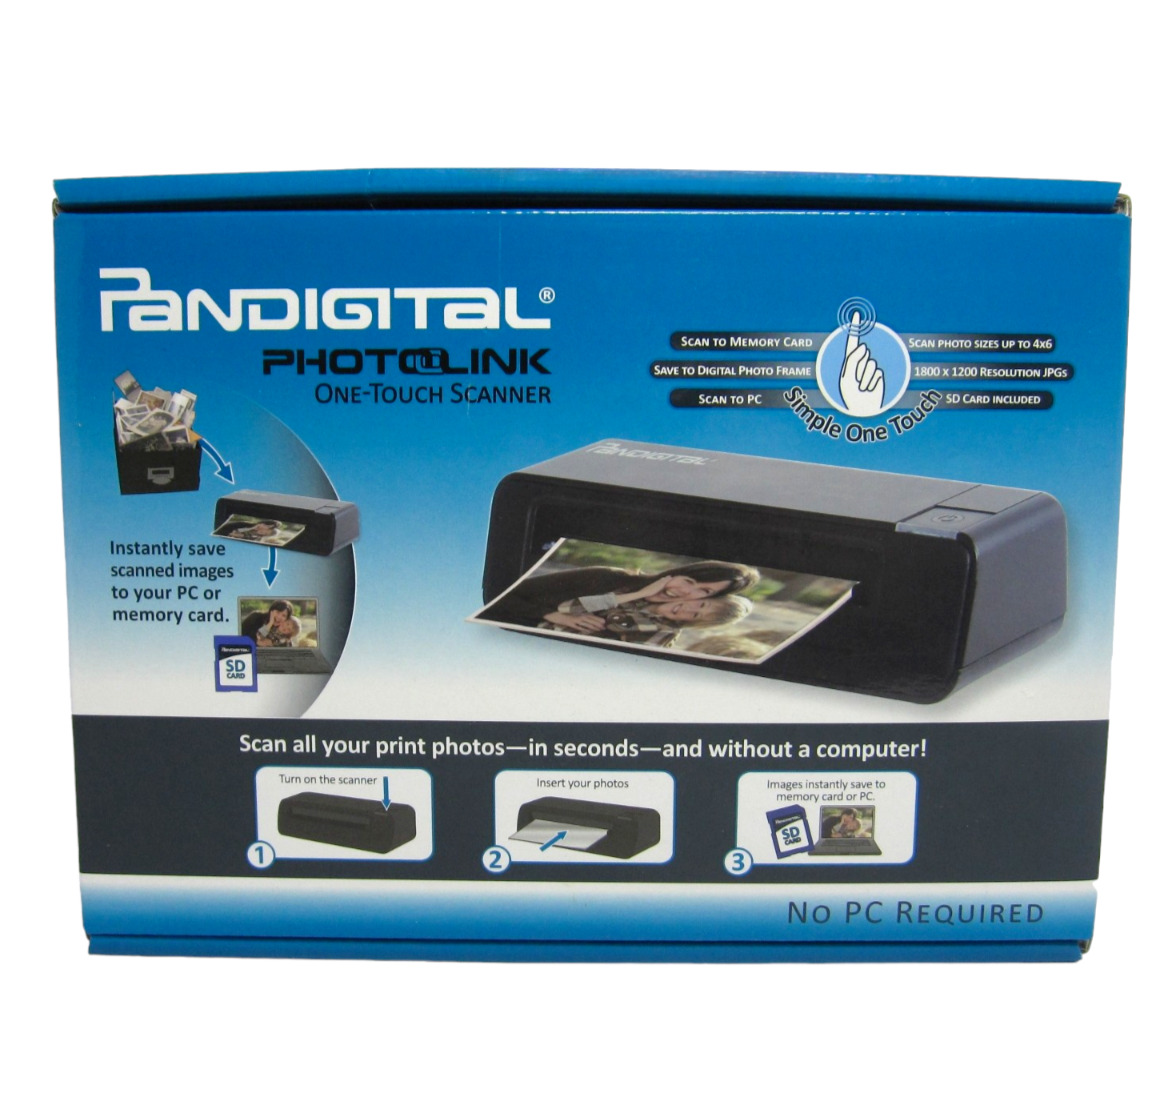 NEW Pandigital PhotoLink One Touch Portable Photo Scanner (PANSCN02) OPEN BOX